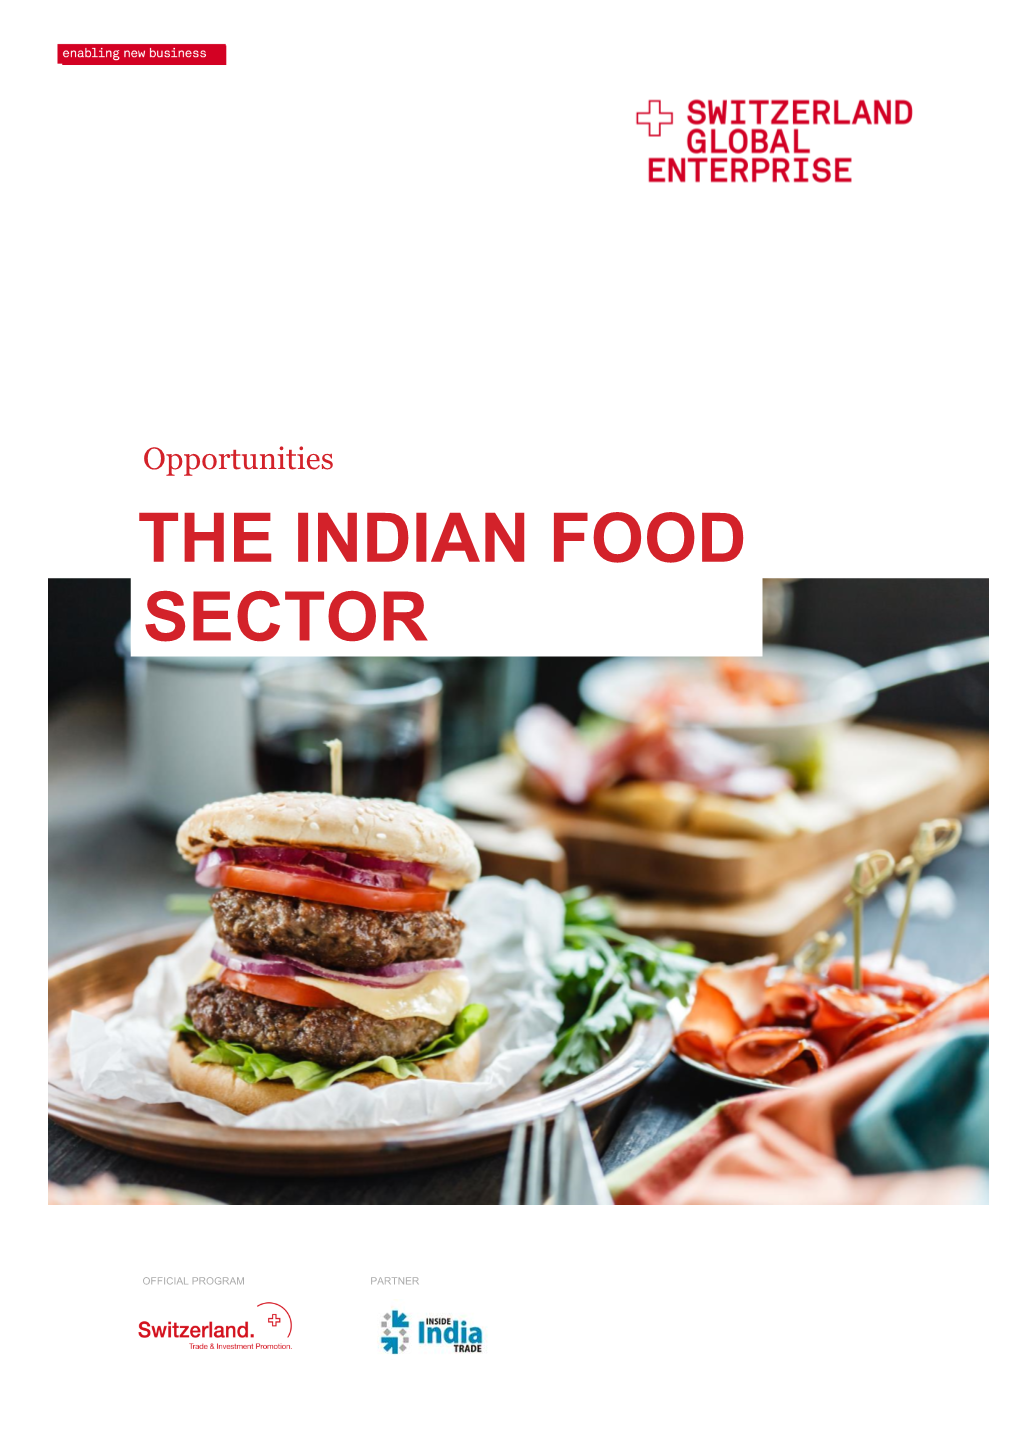 Opportunities the INDIAN FOOD